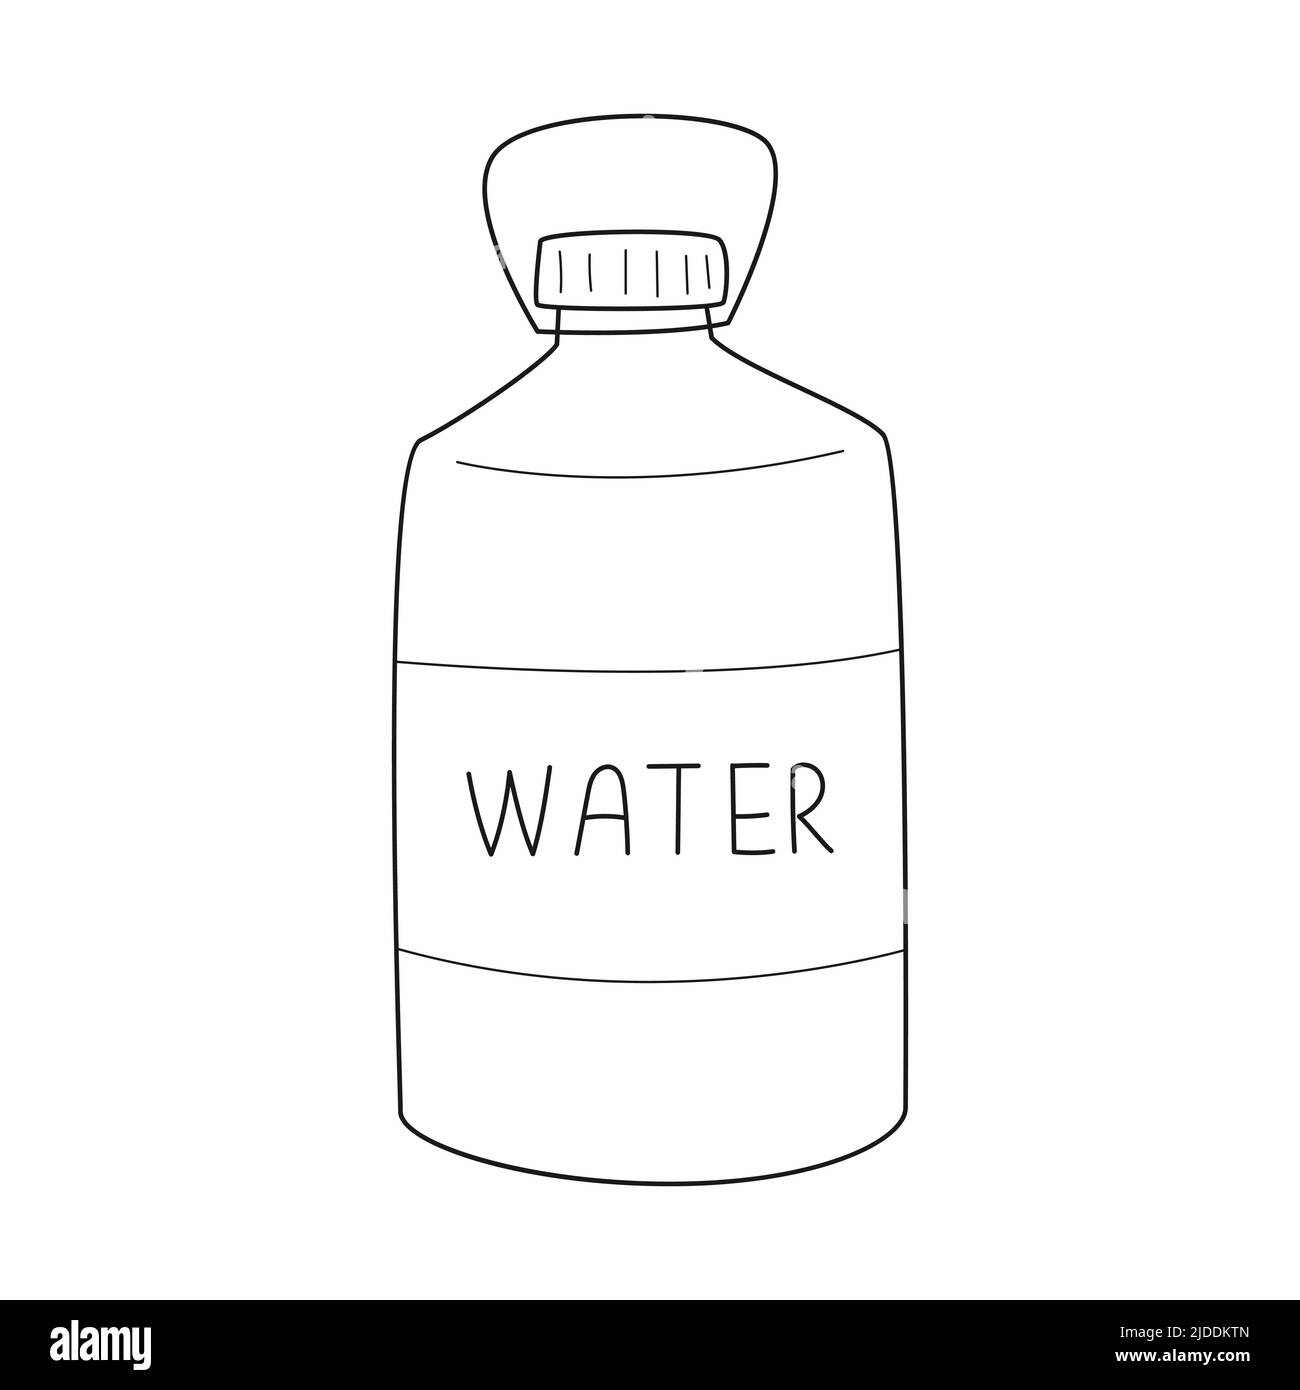 https://c8.alamy.com/comp/2JDDKTN/doodle-large-bottle-of-water-a-canister-for-liquid-in-a-large-volume-for-camping-picnic-car-travel-water-supply-outline-black-and-white-vector-il-2JDDKTN.jpg